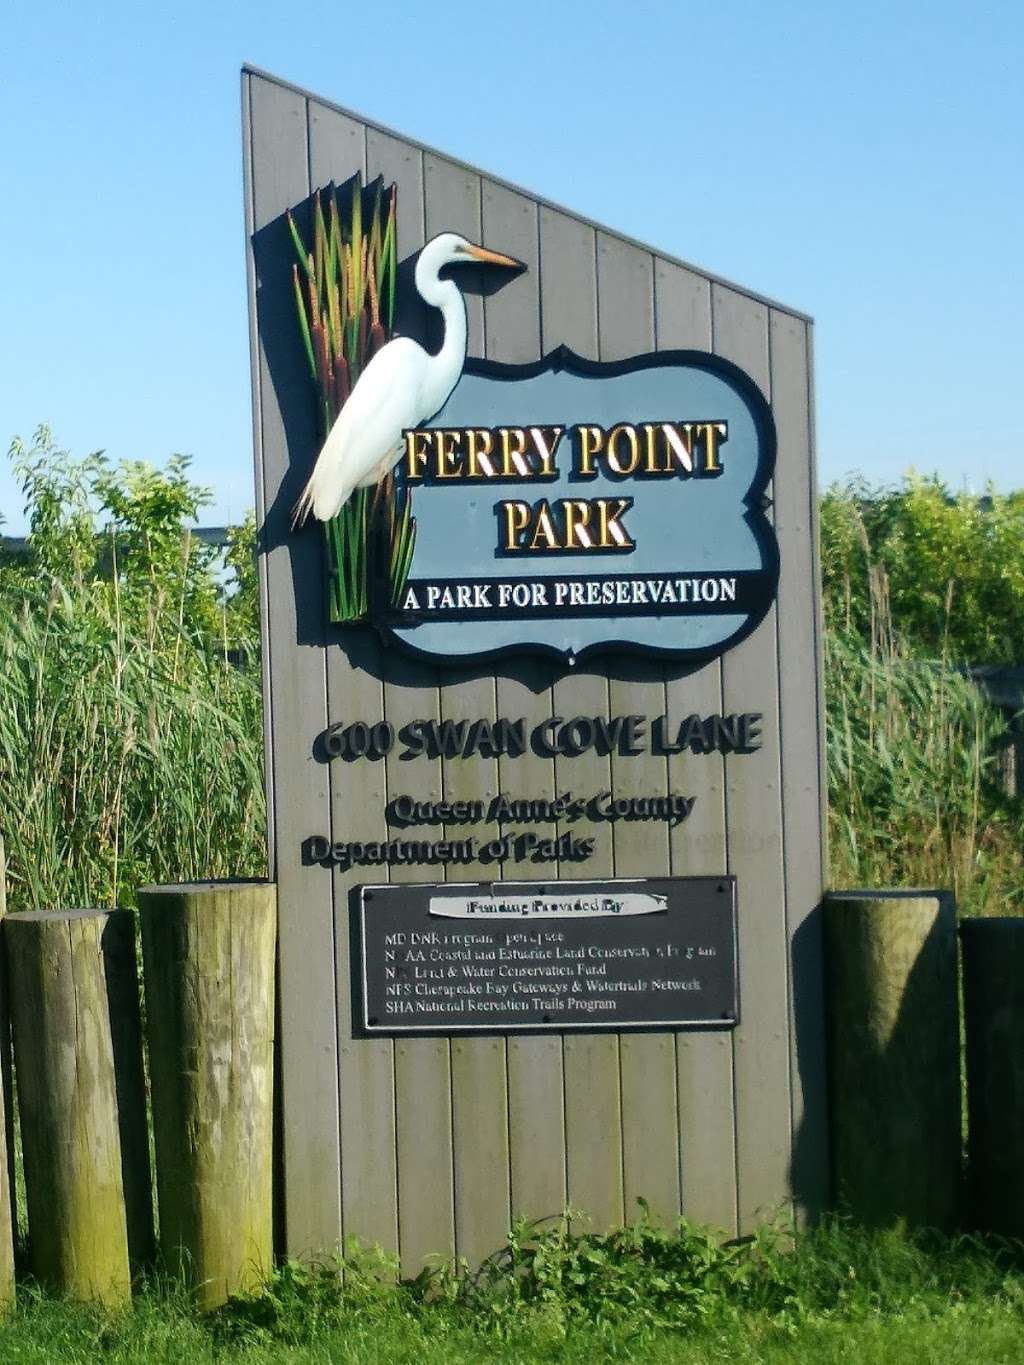 Ferry Point Park | 600 Swan Cove Ln, Chester, MD 21619, USA